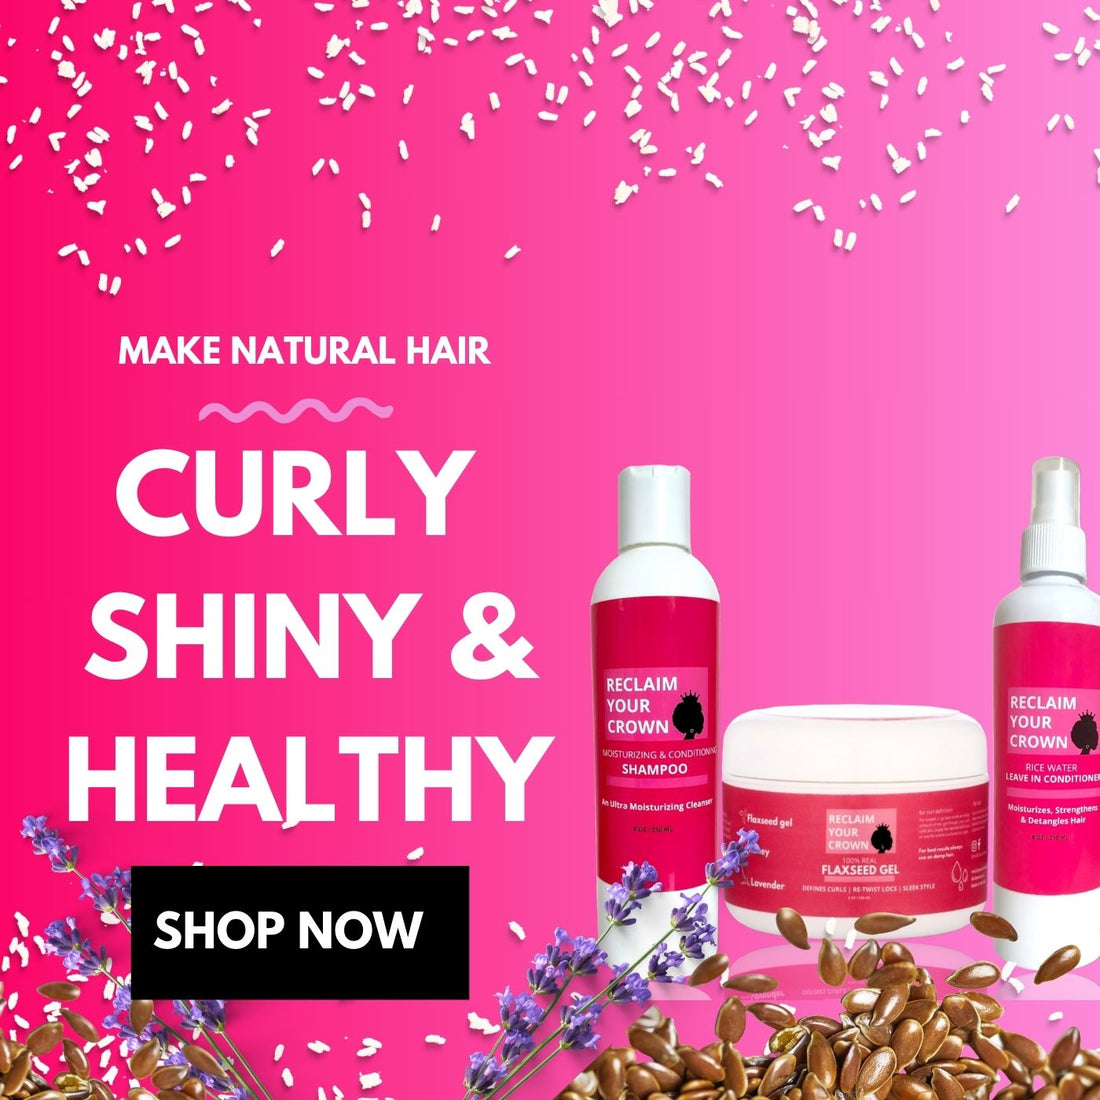 Reclaim Your Crown Products make natural hair curly, shiny and healthy 